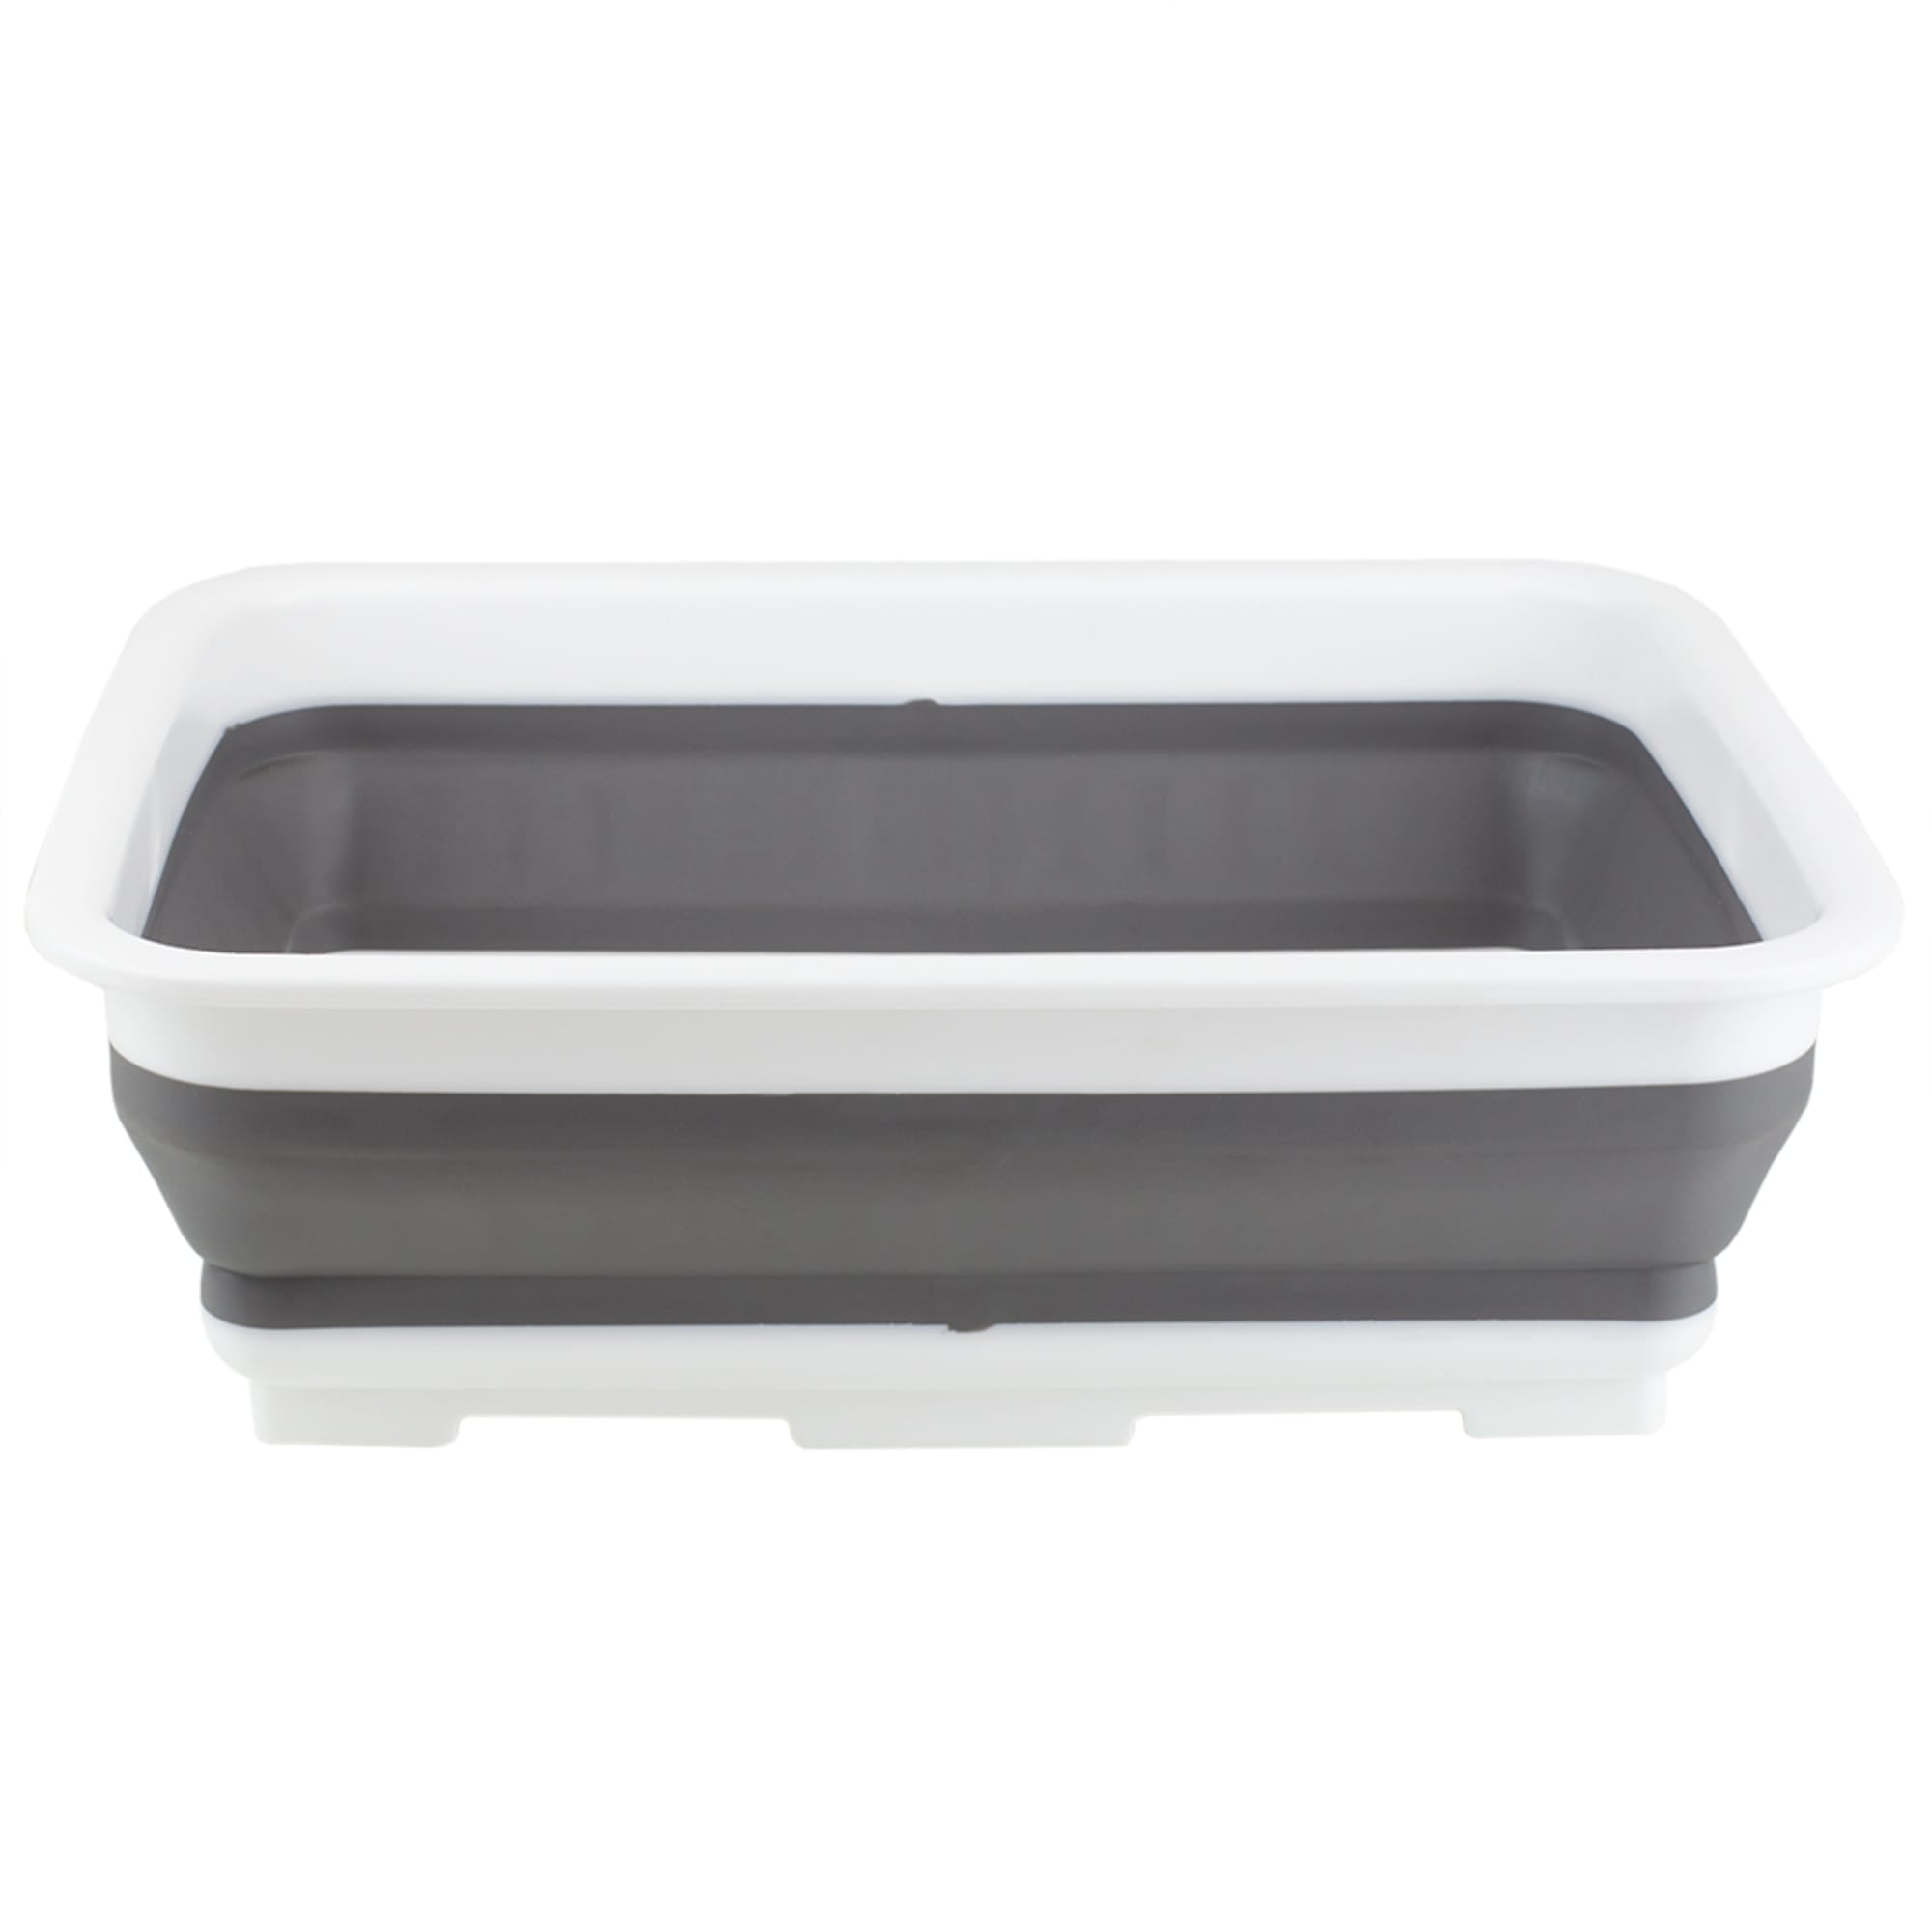 Home Basics Collapsible Silicone and Plastic Multi-Purpose Storage Washing Basin, Grey $6.00 EACH, CASE PACK OF 12